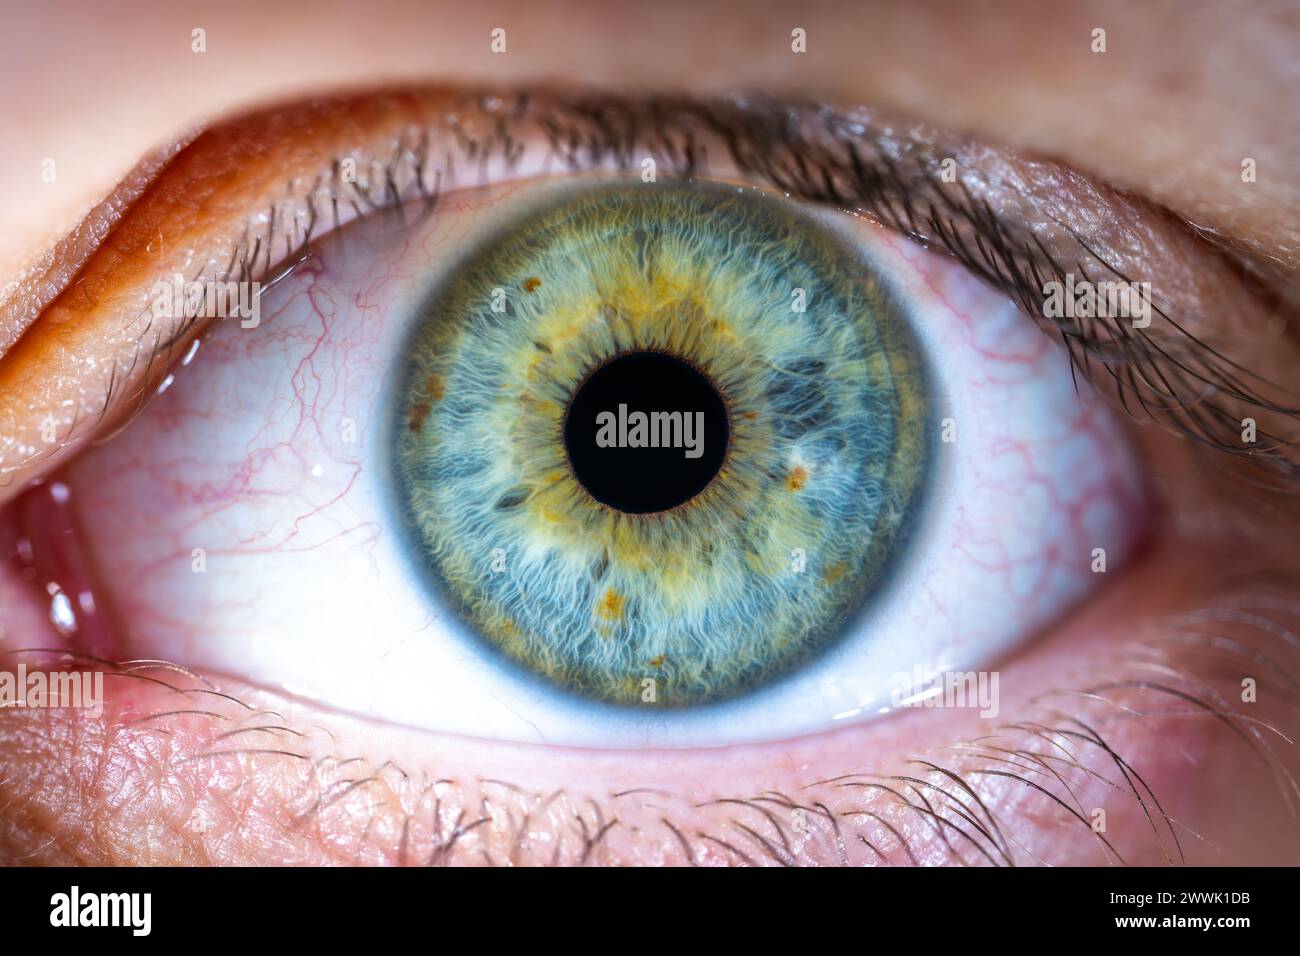 Description: Female Blue-Green Colored Eye with brown pigment spots. Pupil Opened. Close Up. Structural Anatomy. Human Iris Macro Detail. Stock Photo